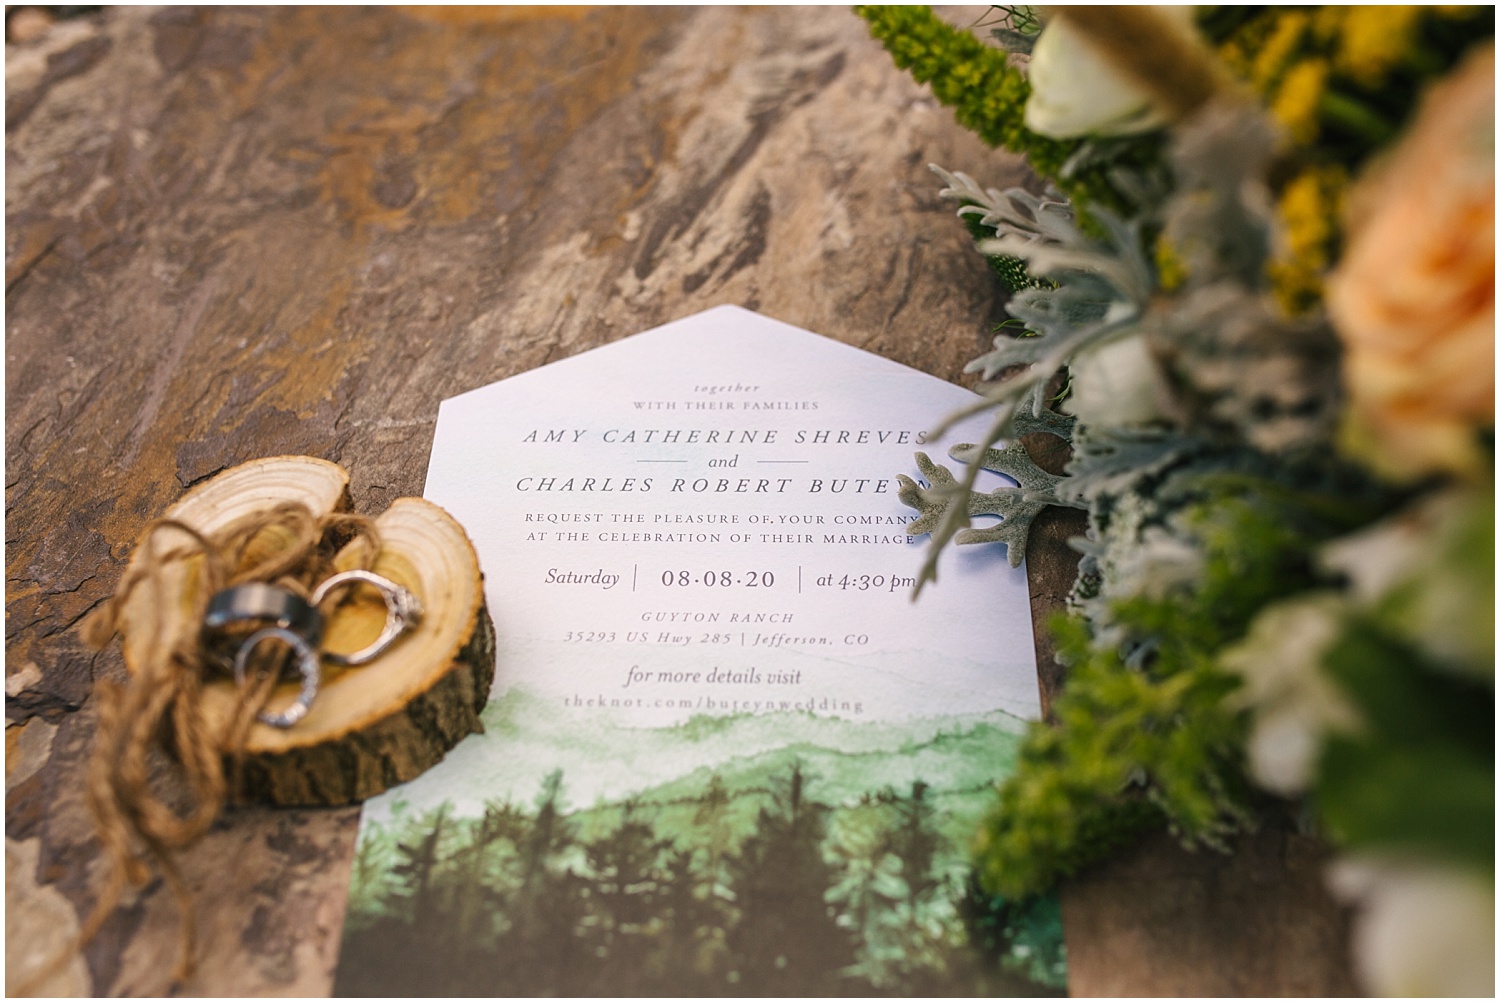 Guyton Ranch Wedding invitation suite with bride's bouquet and the wedding rings